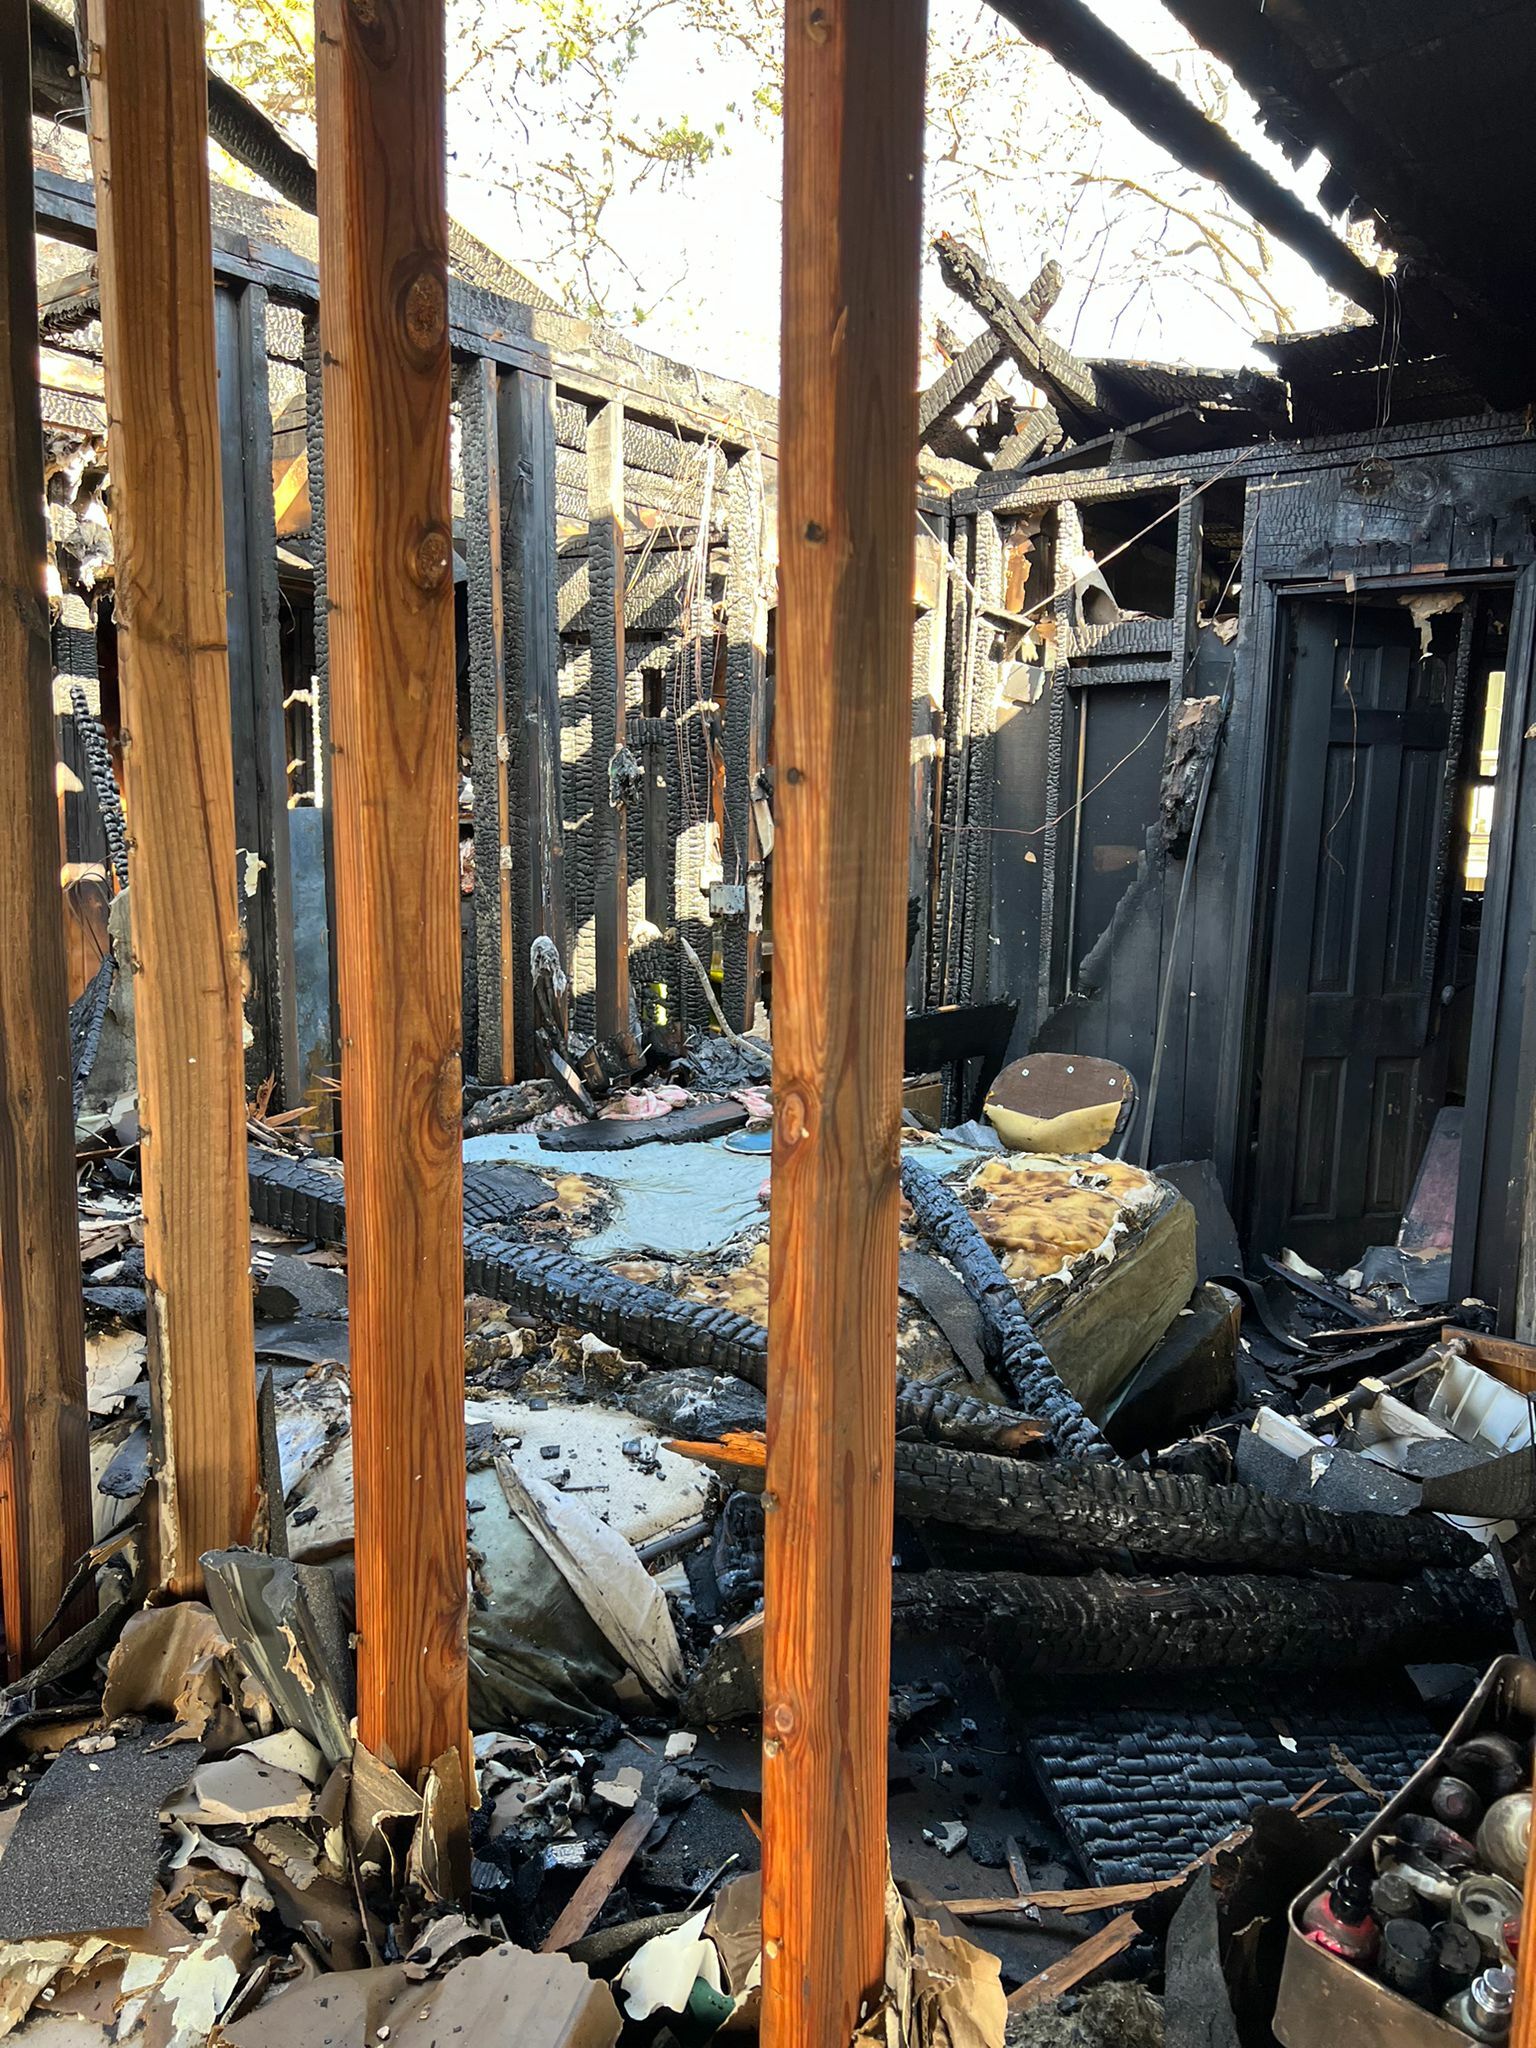 The aftermath of the fire at the 317 East Montauk Highway apartment building. COURTESY HERMES AND MARINA GONZALEZ